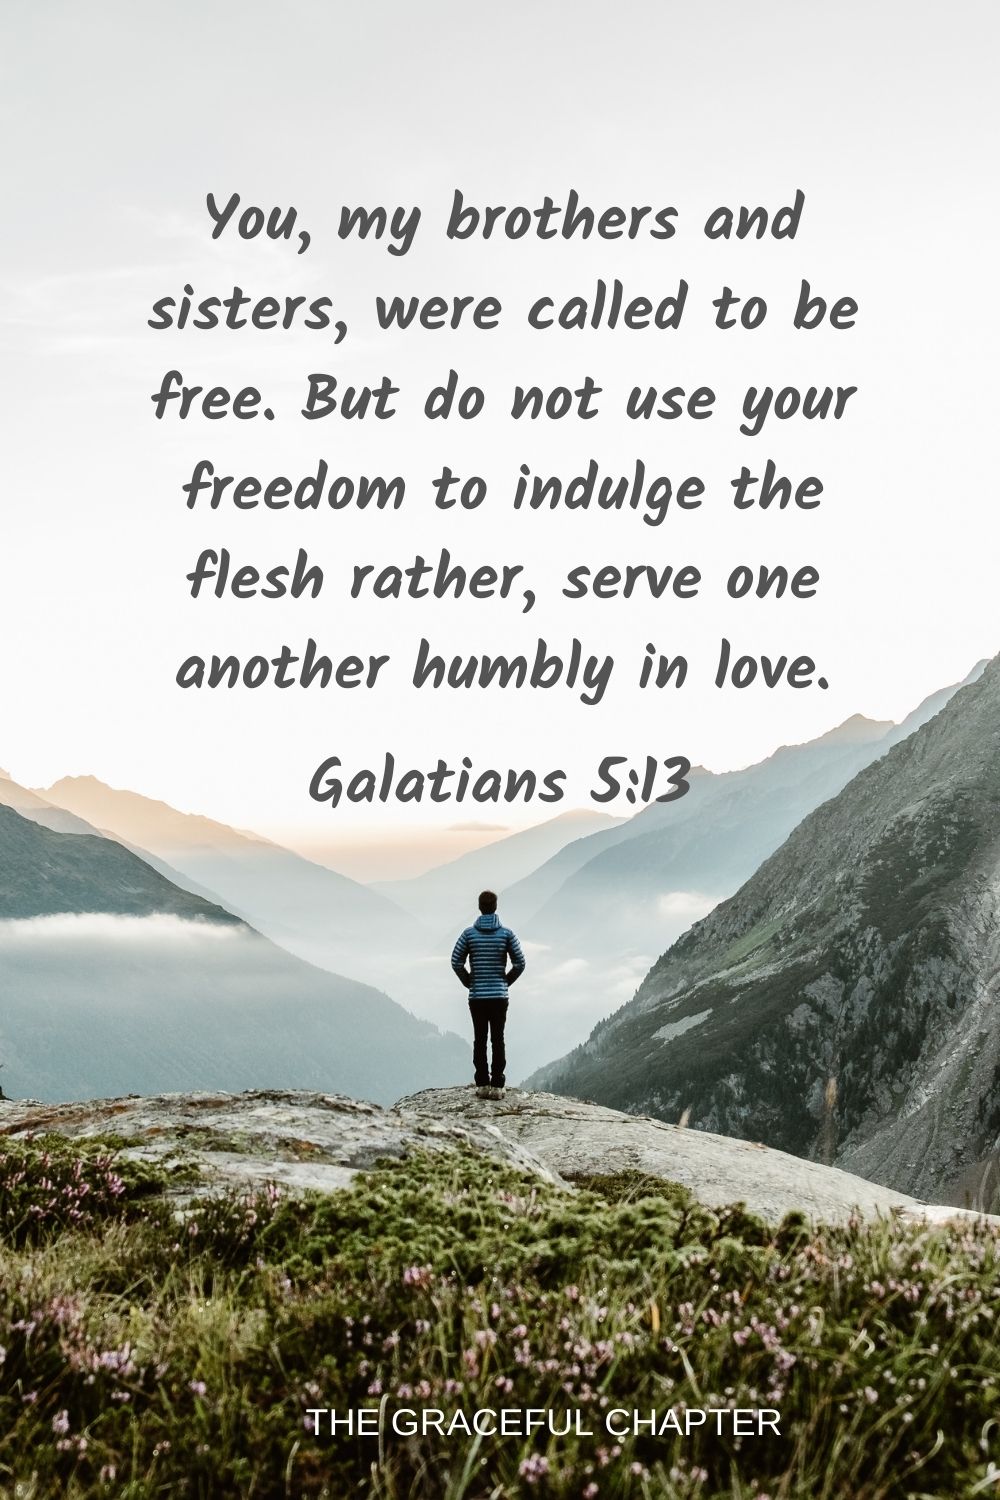 You, my brothers and sisters, were called to be free. But do not use your freedom to indulge the flesh rather, serve one another humbly in love. Galatians 5:13